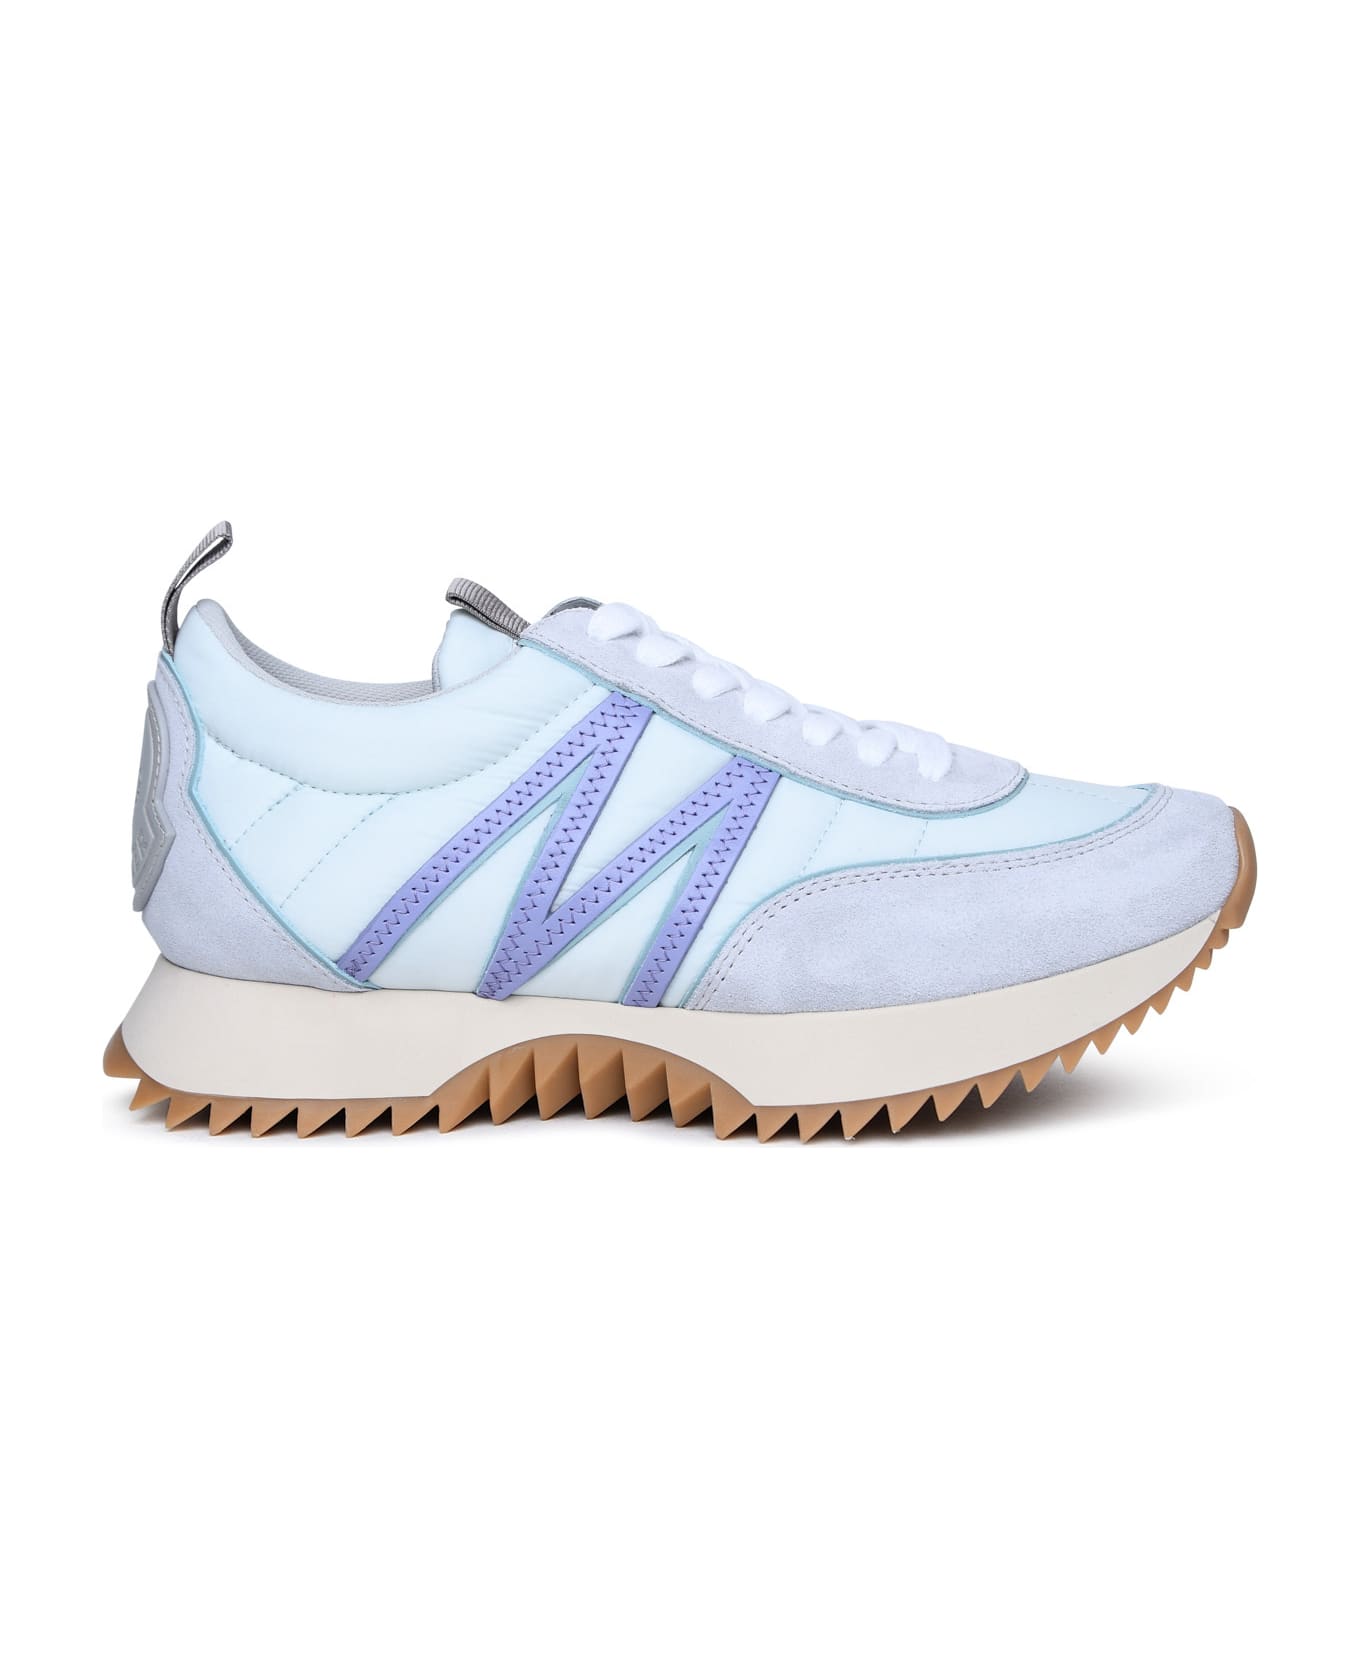 Moncler 'pacey' Sneakers In Light Blue Polyamide - Light Blue